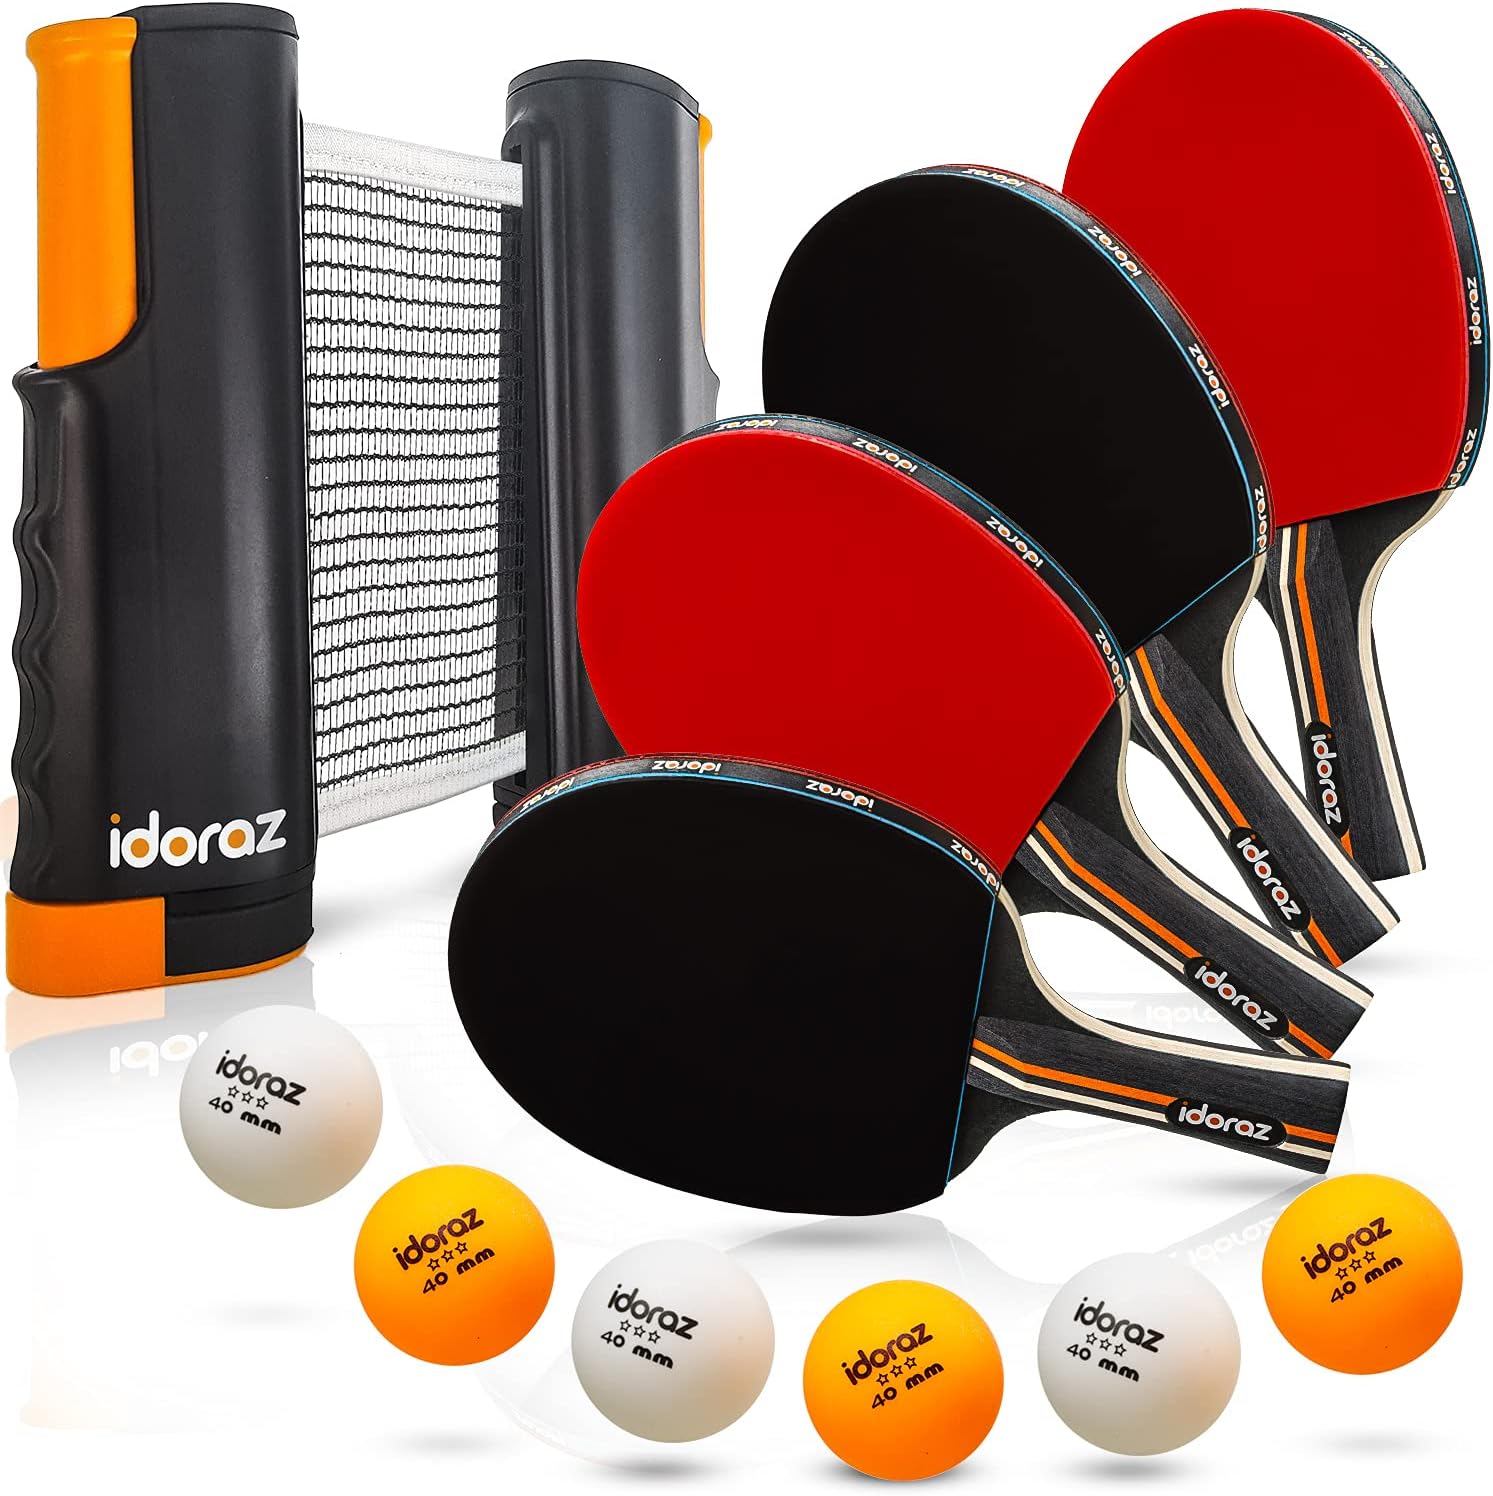 Ping Pong Paddle Set with Retractable Net Portable Ping-Pong Game with 2 Premium Table Tennis Rackets and 4 Ping-Pong Balls 1 Retractable Table Tennis Net for Kids Adults